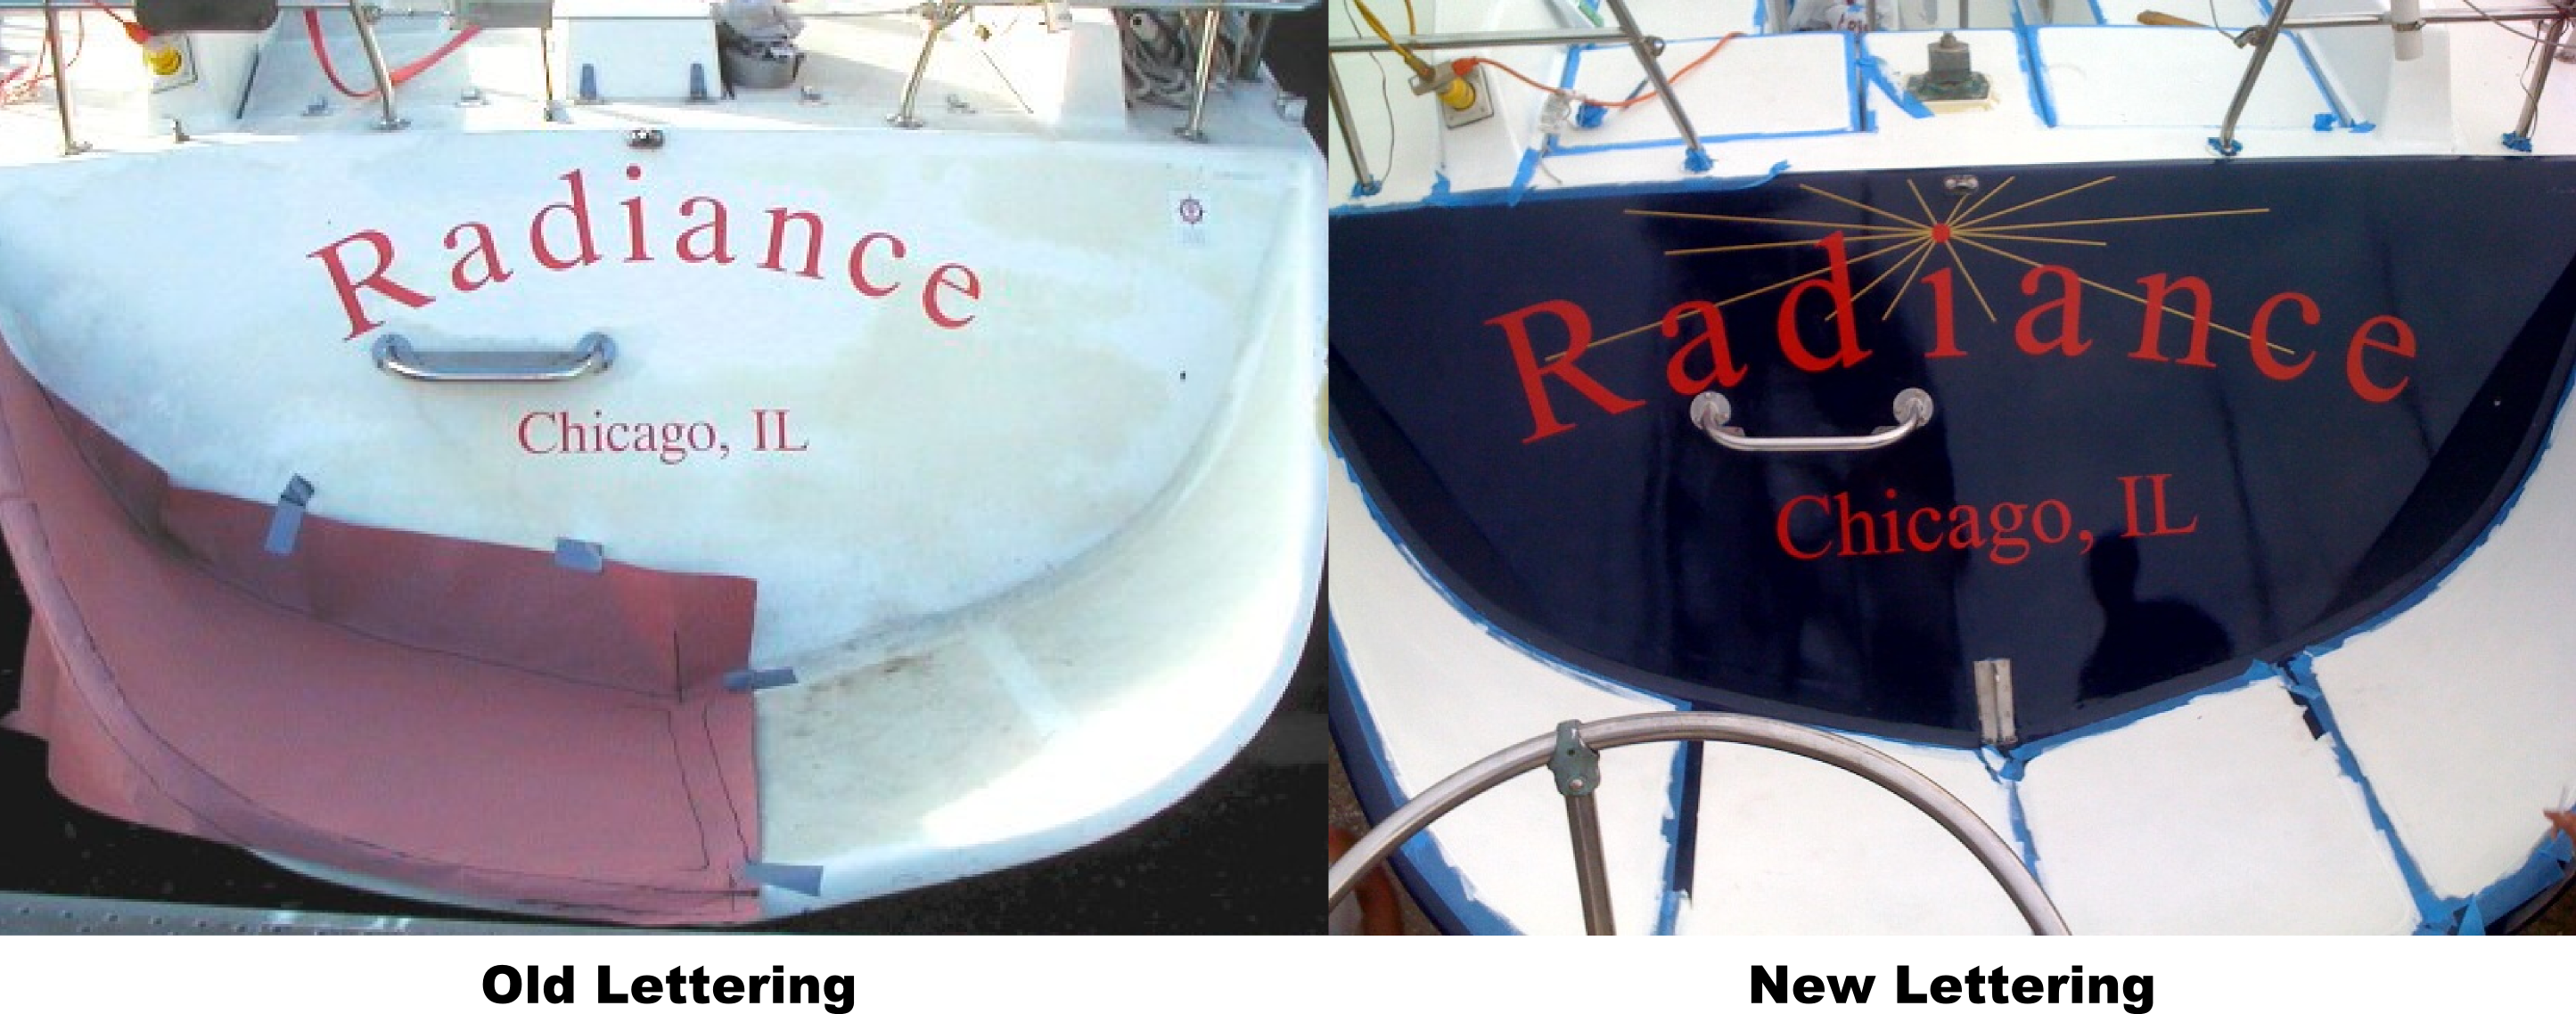 Radiance boat before and after